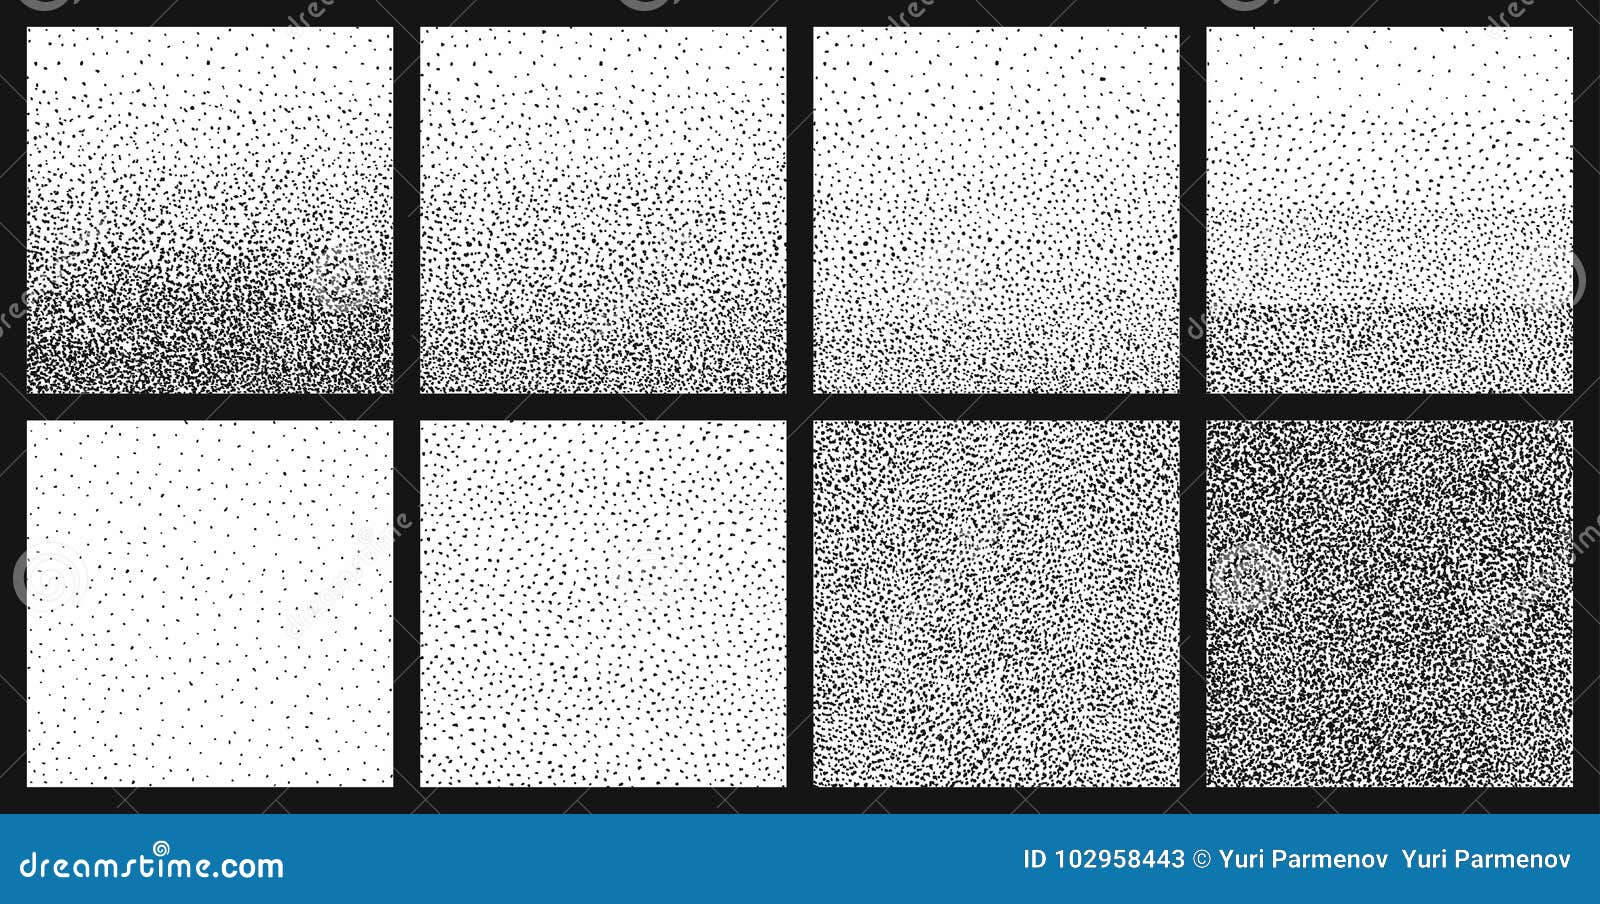 halftone gradient with random dots. abstract monochrome pointillist, speckled background set. texture with randomly disposed spots